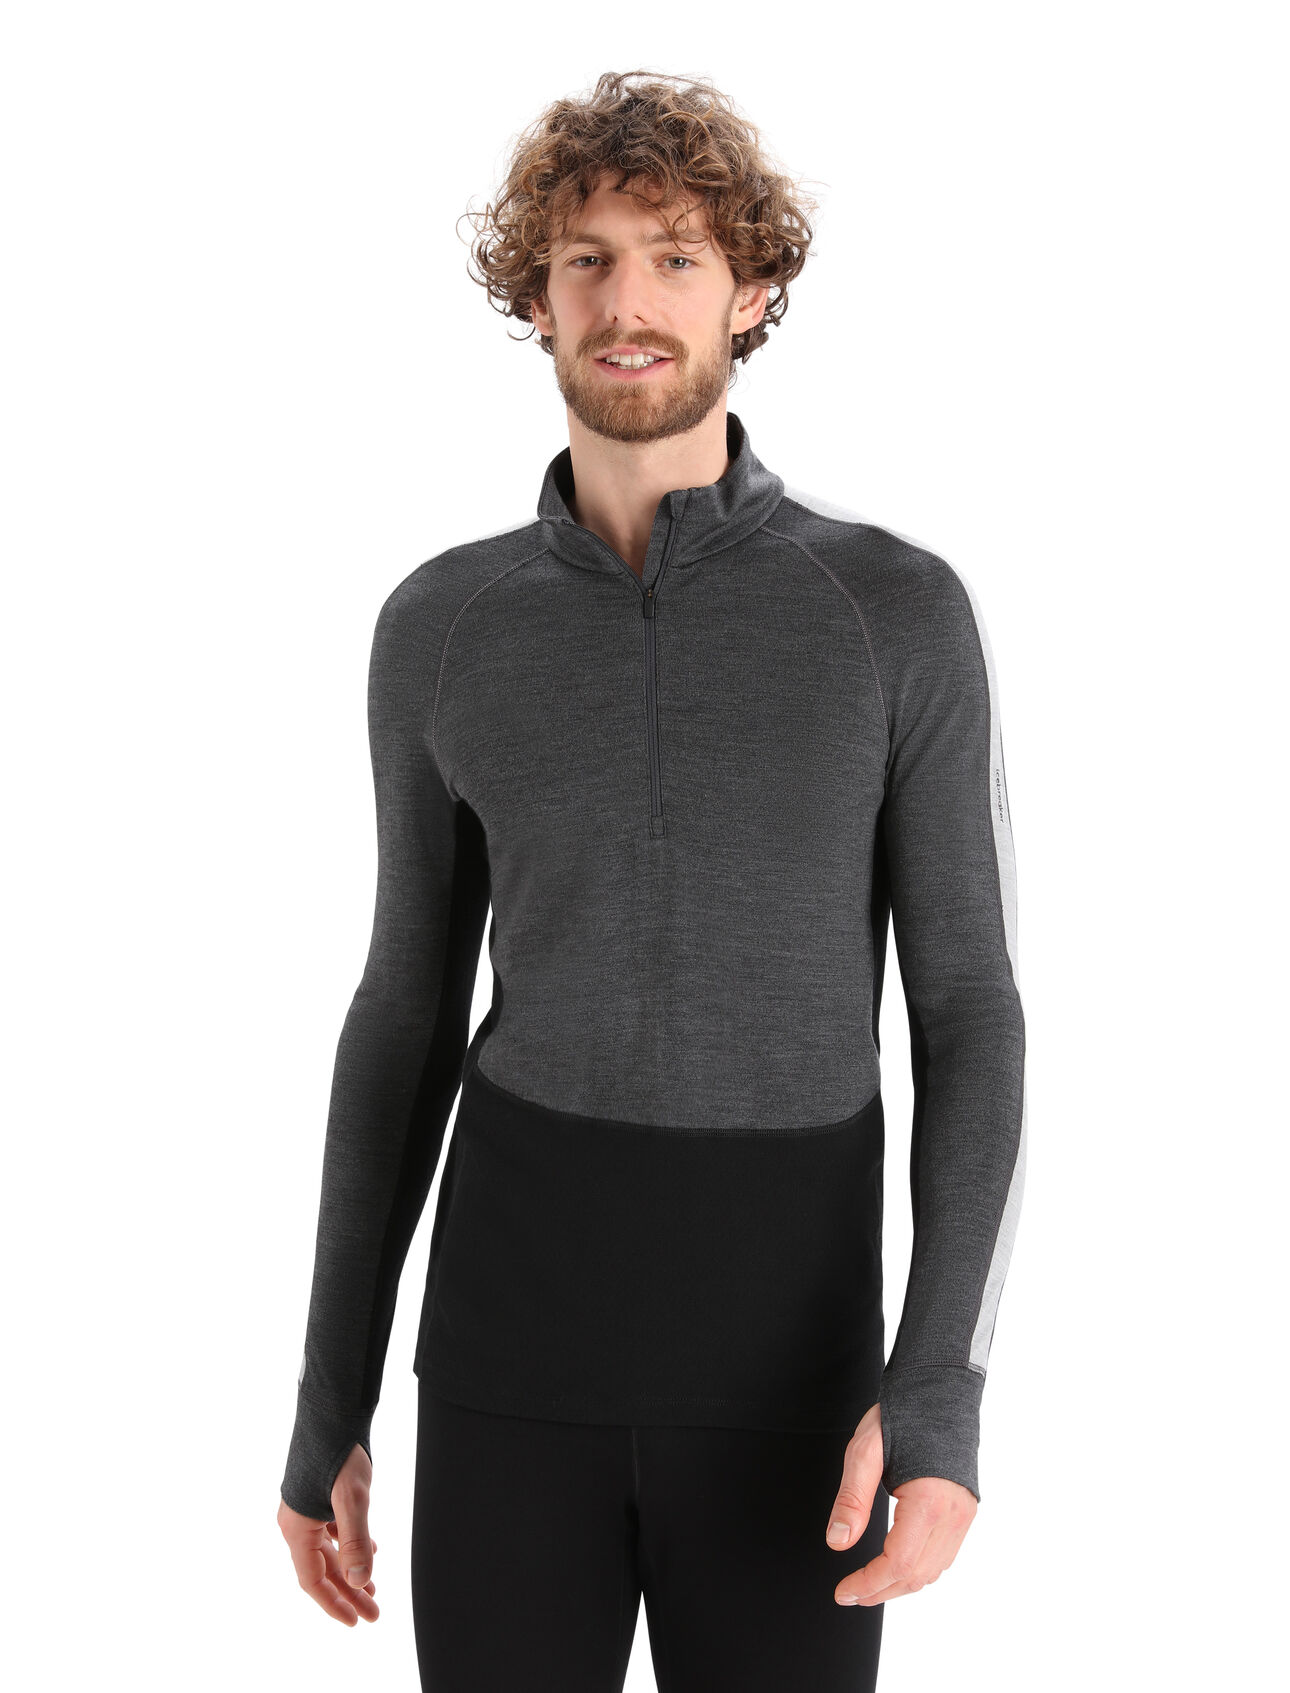 Mens 260 ZoneKnit™ Merino Long Sleeve Half Zip Thermal Top A heavyweight merino base layer top designed to help regulate temperature during high-intensity activity, the 260 ZoneKnit™ Long Sleeve Half Zip feature 100% pure and natural merino wool.